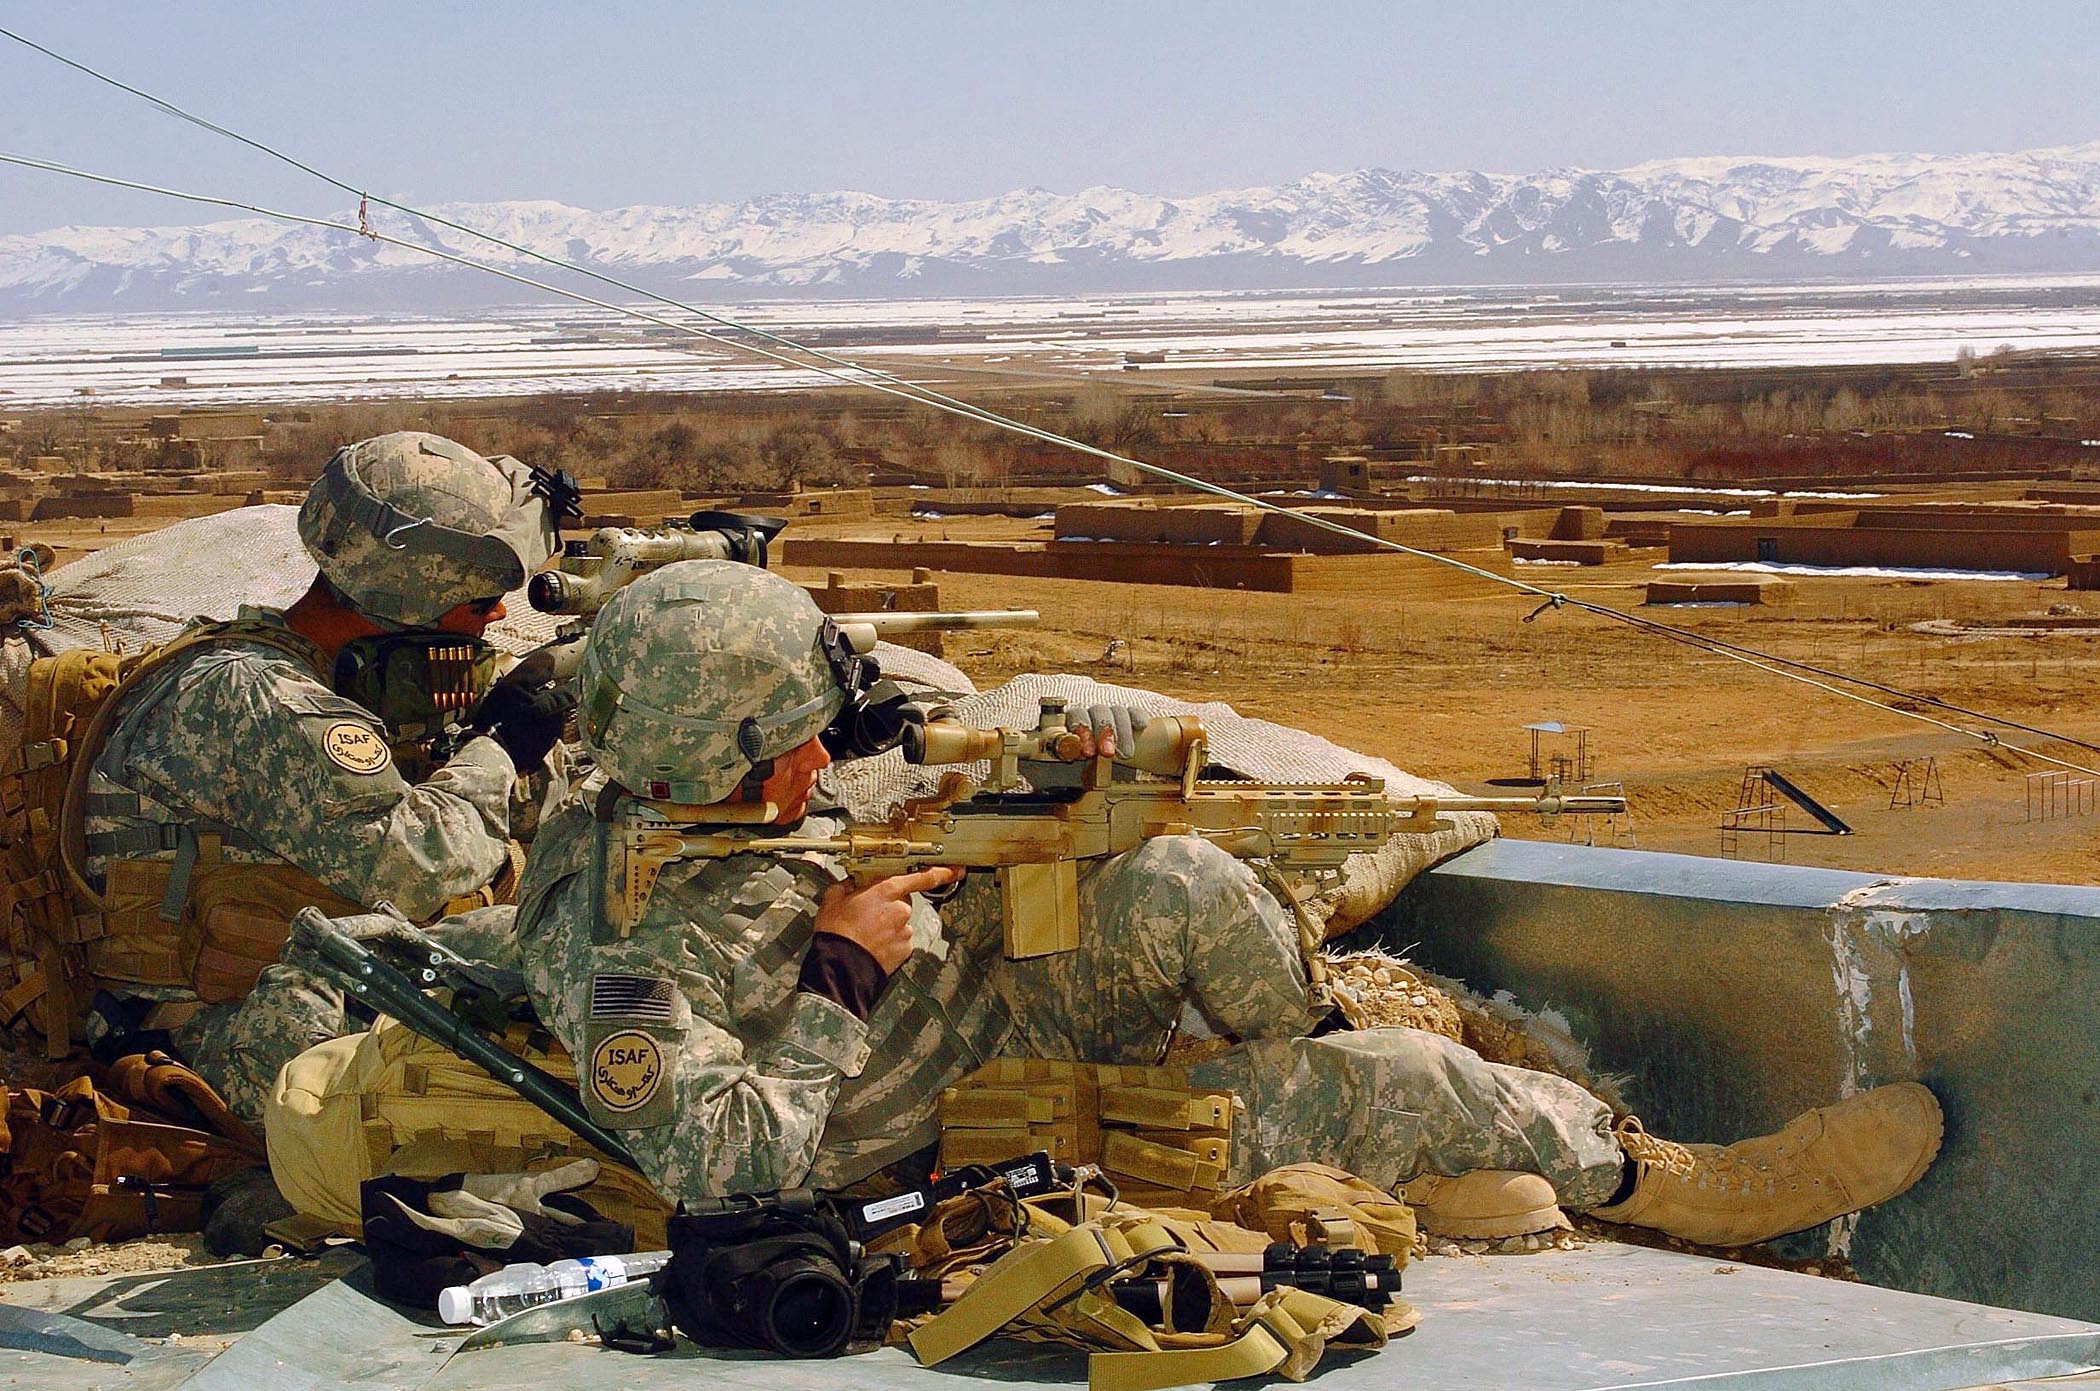 2100x1391 Airborne Snipers In Afghanistan | 2100 x 1391 | Download | Close